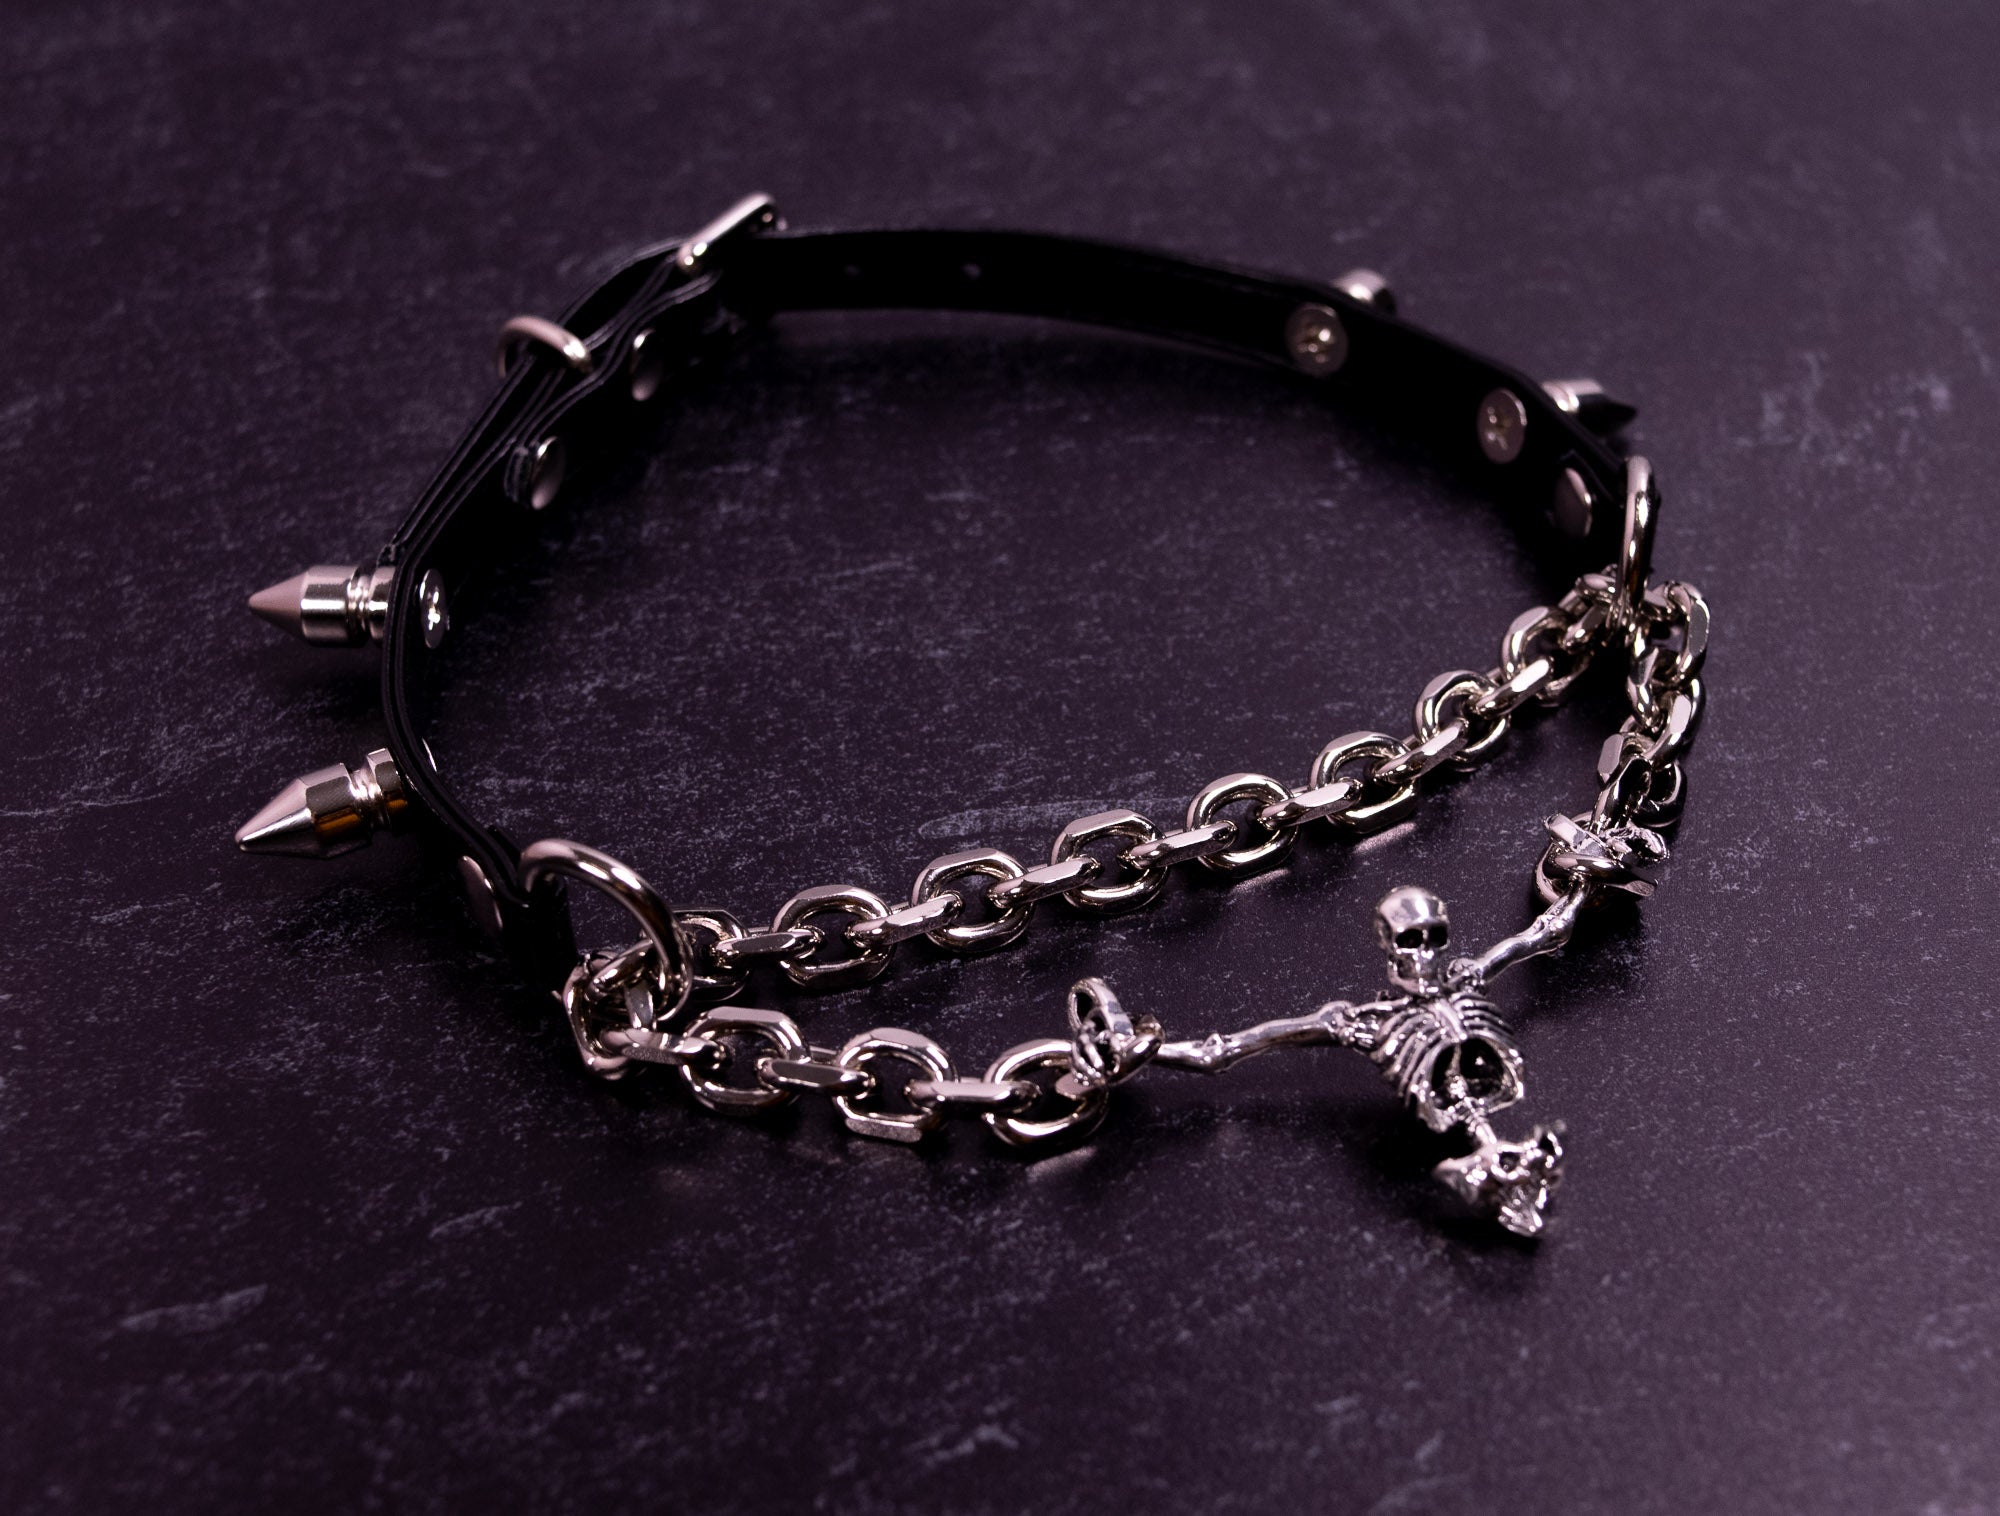 Spiked 'Chained Up' - 3/8" Black Vegan Leather Martingale Collar